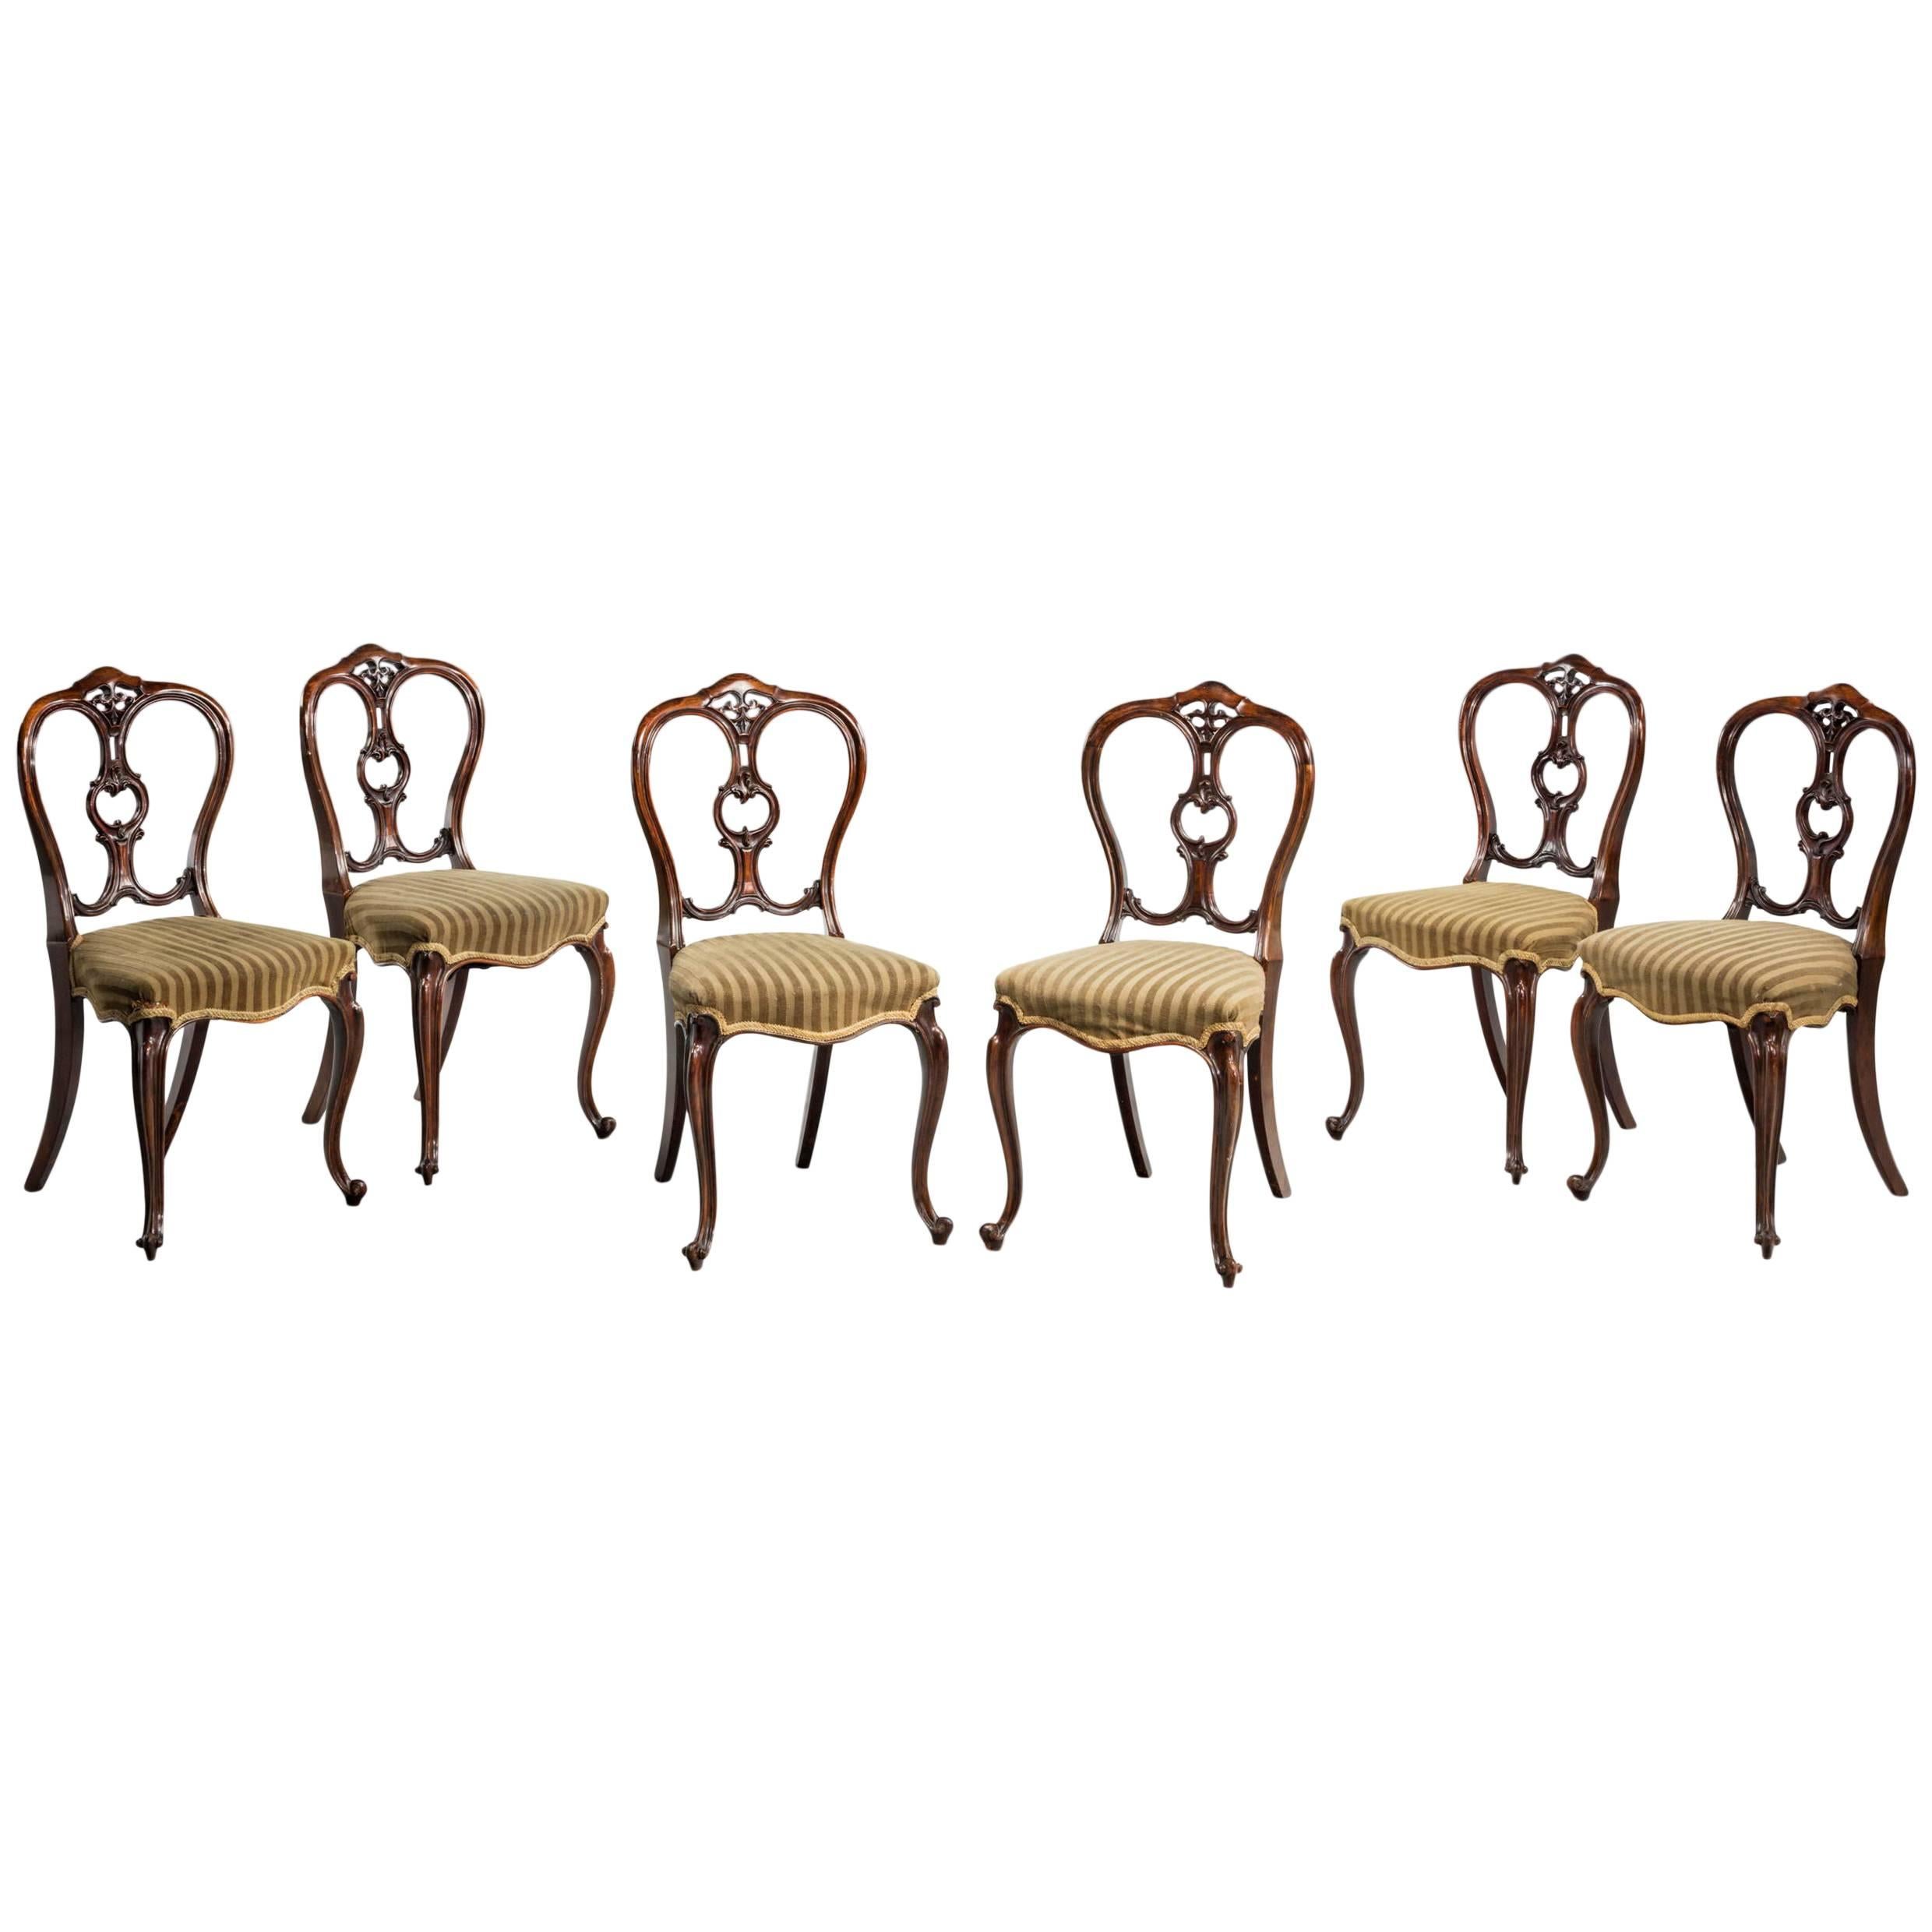 Set of Six Mid-Victorian Balloon Back Chairs